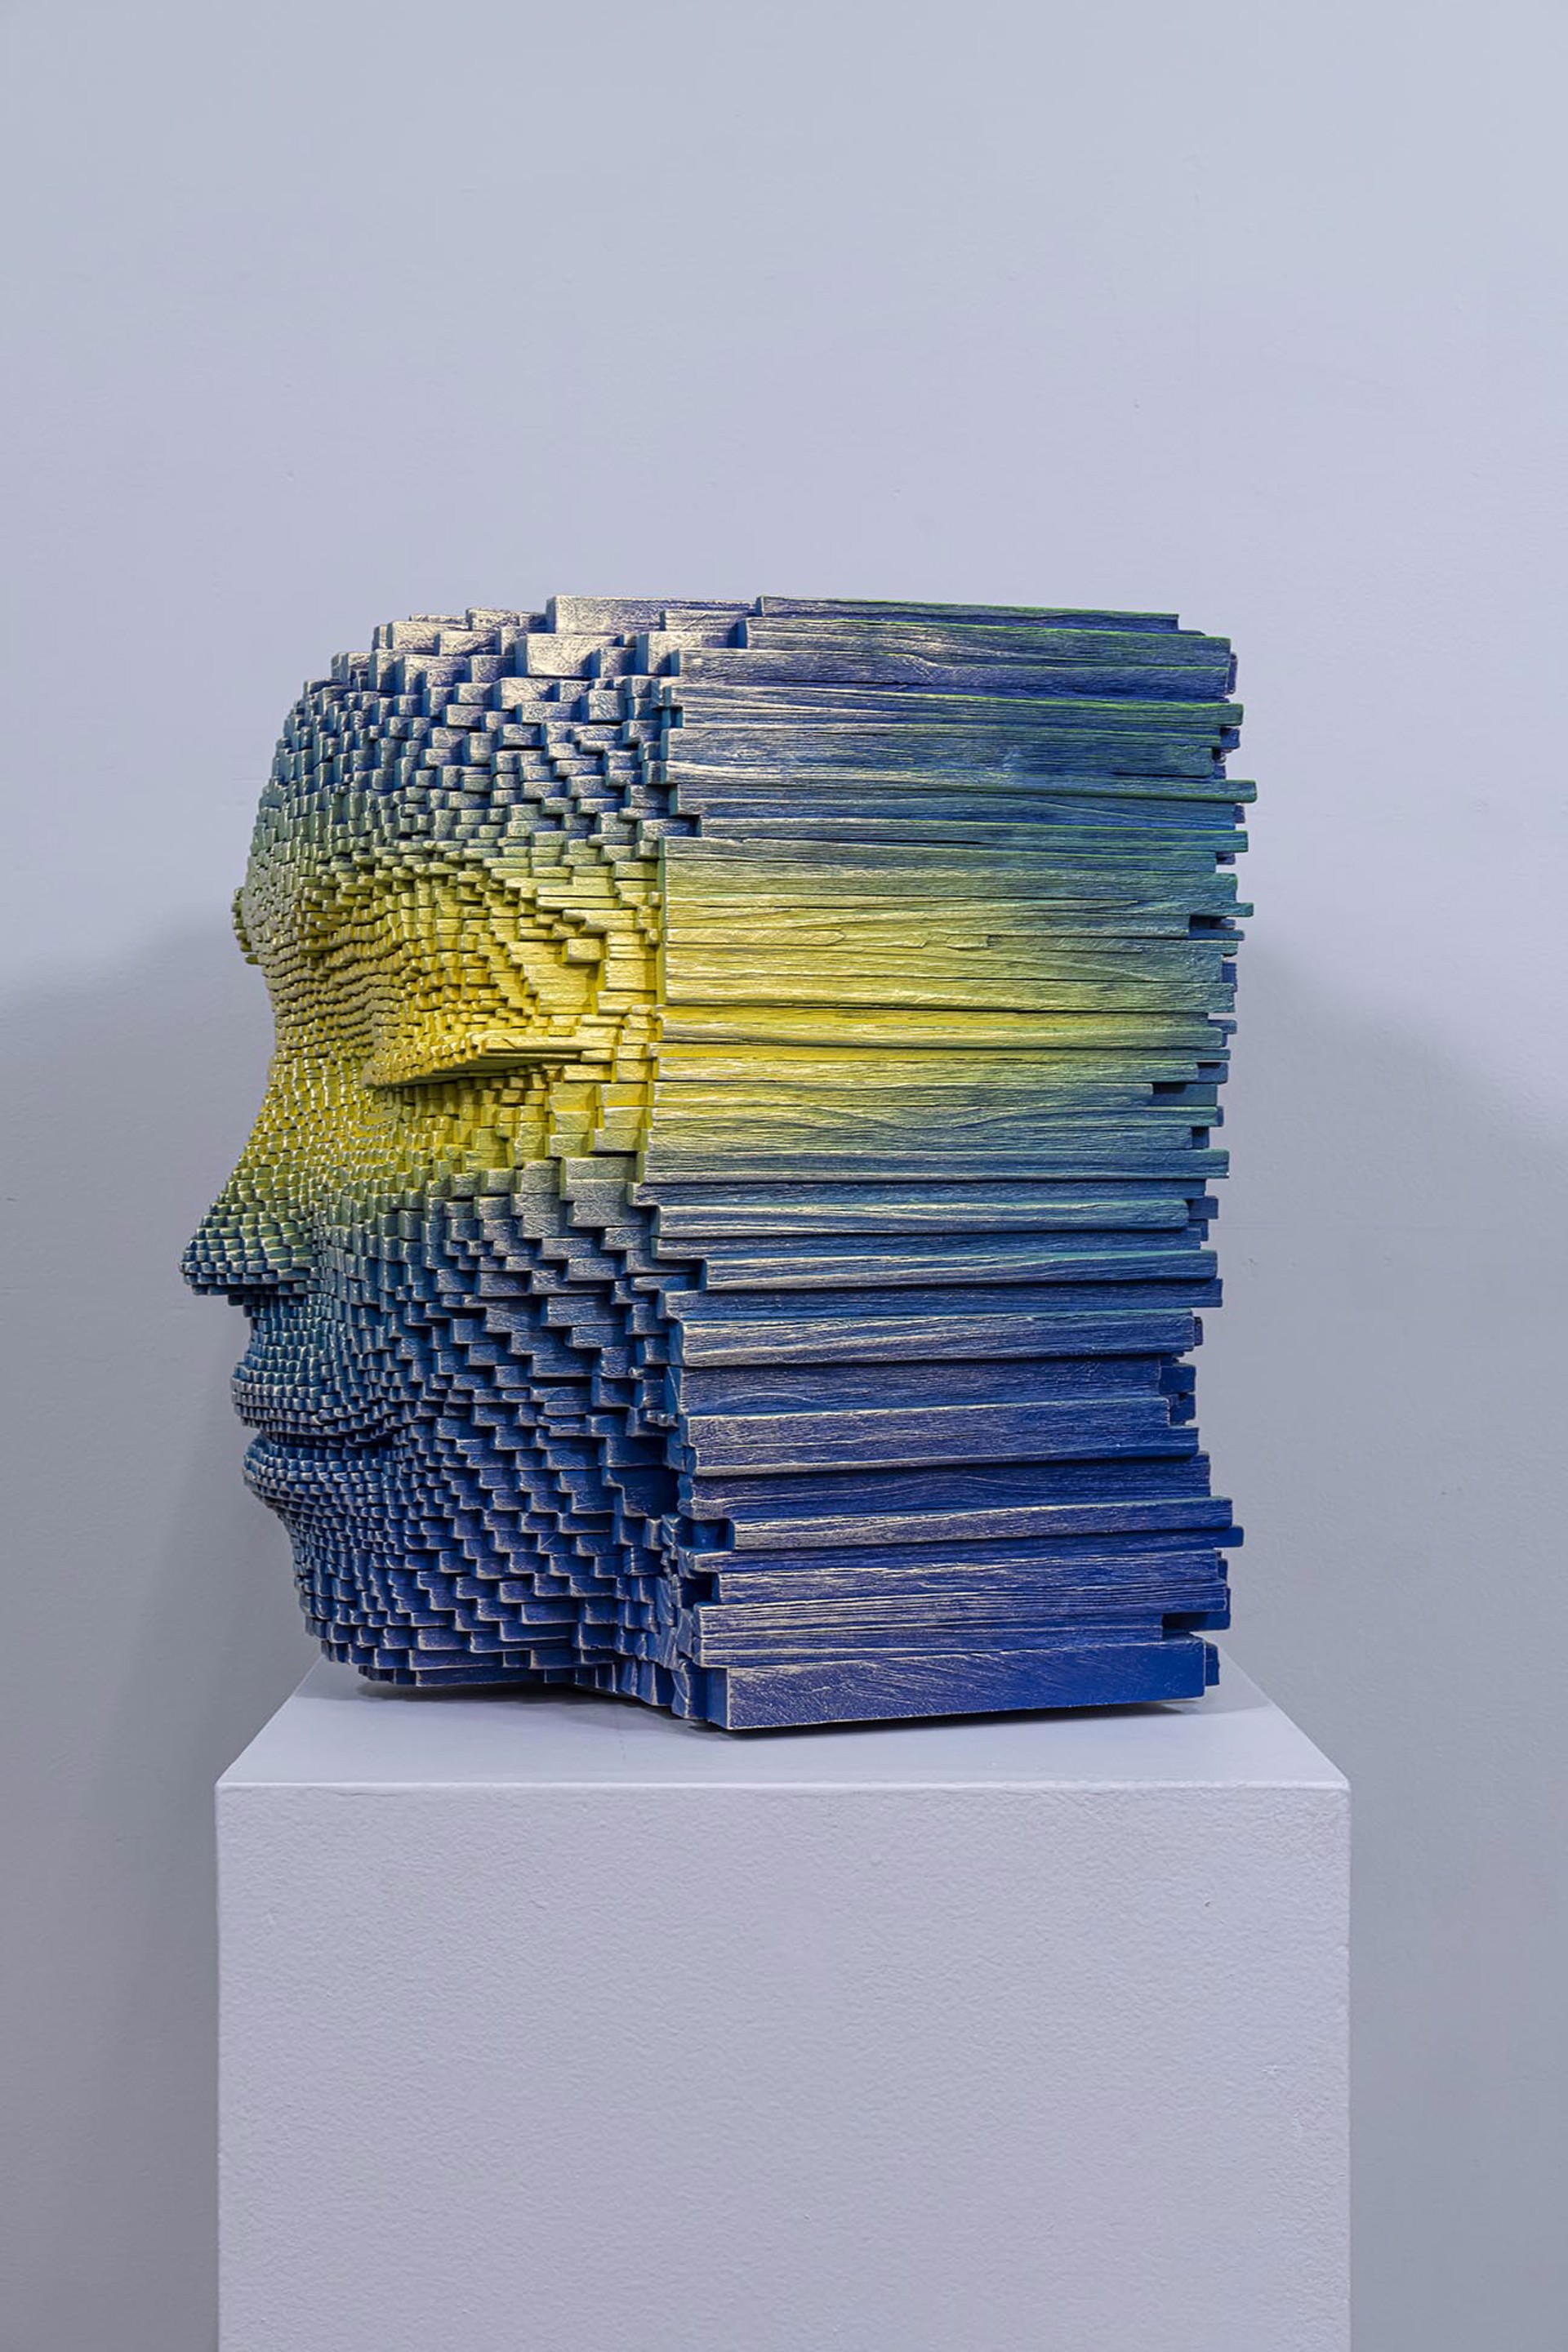 Feeling the Light by Gil Bruvel